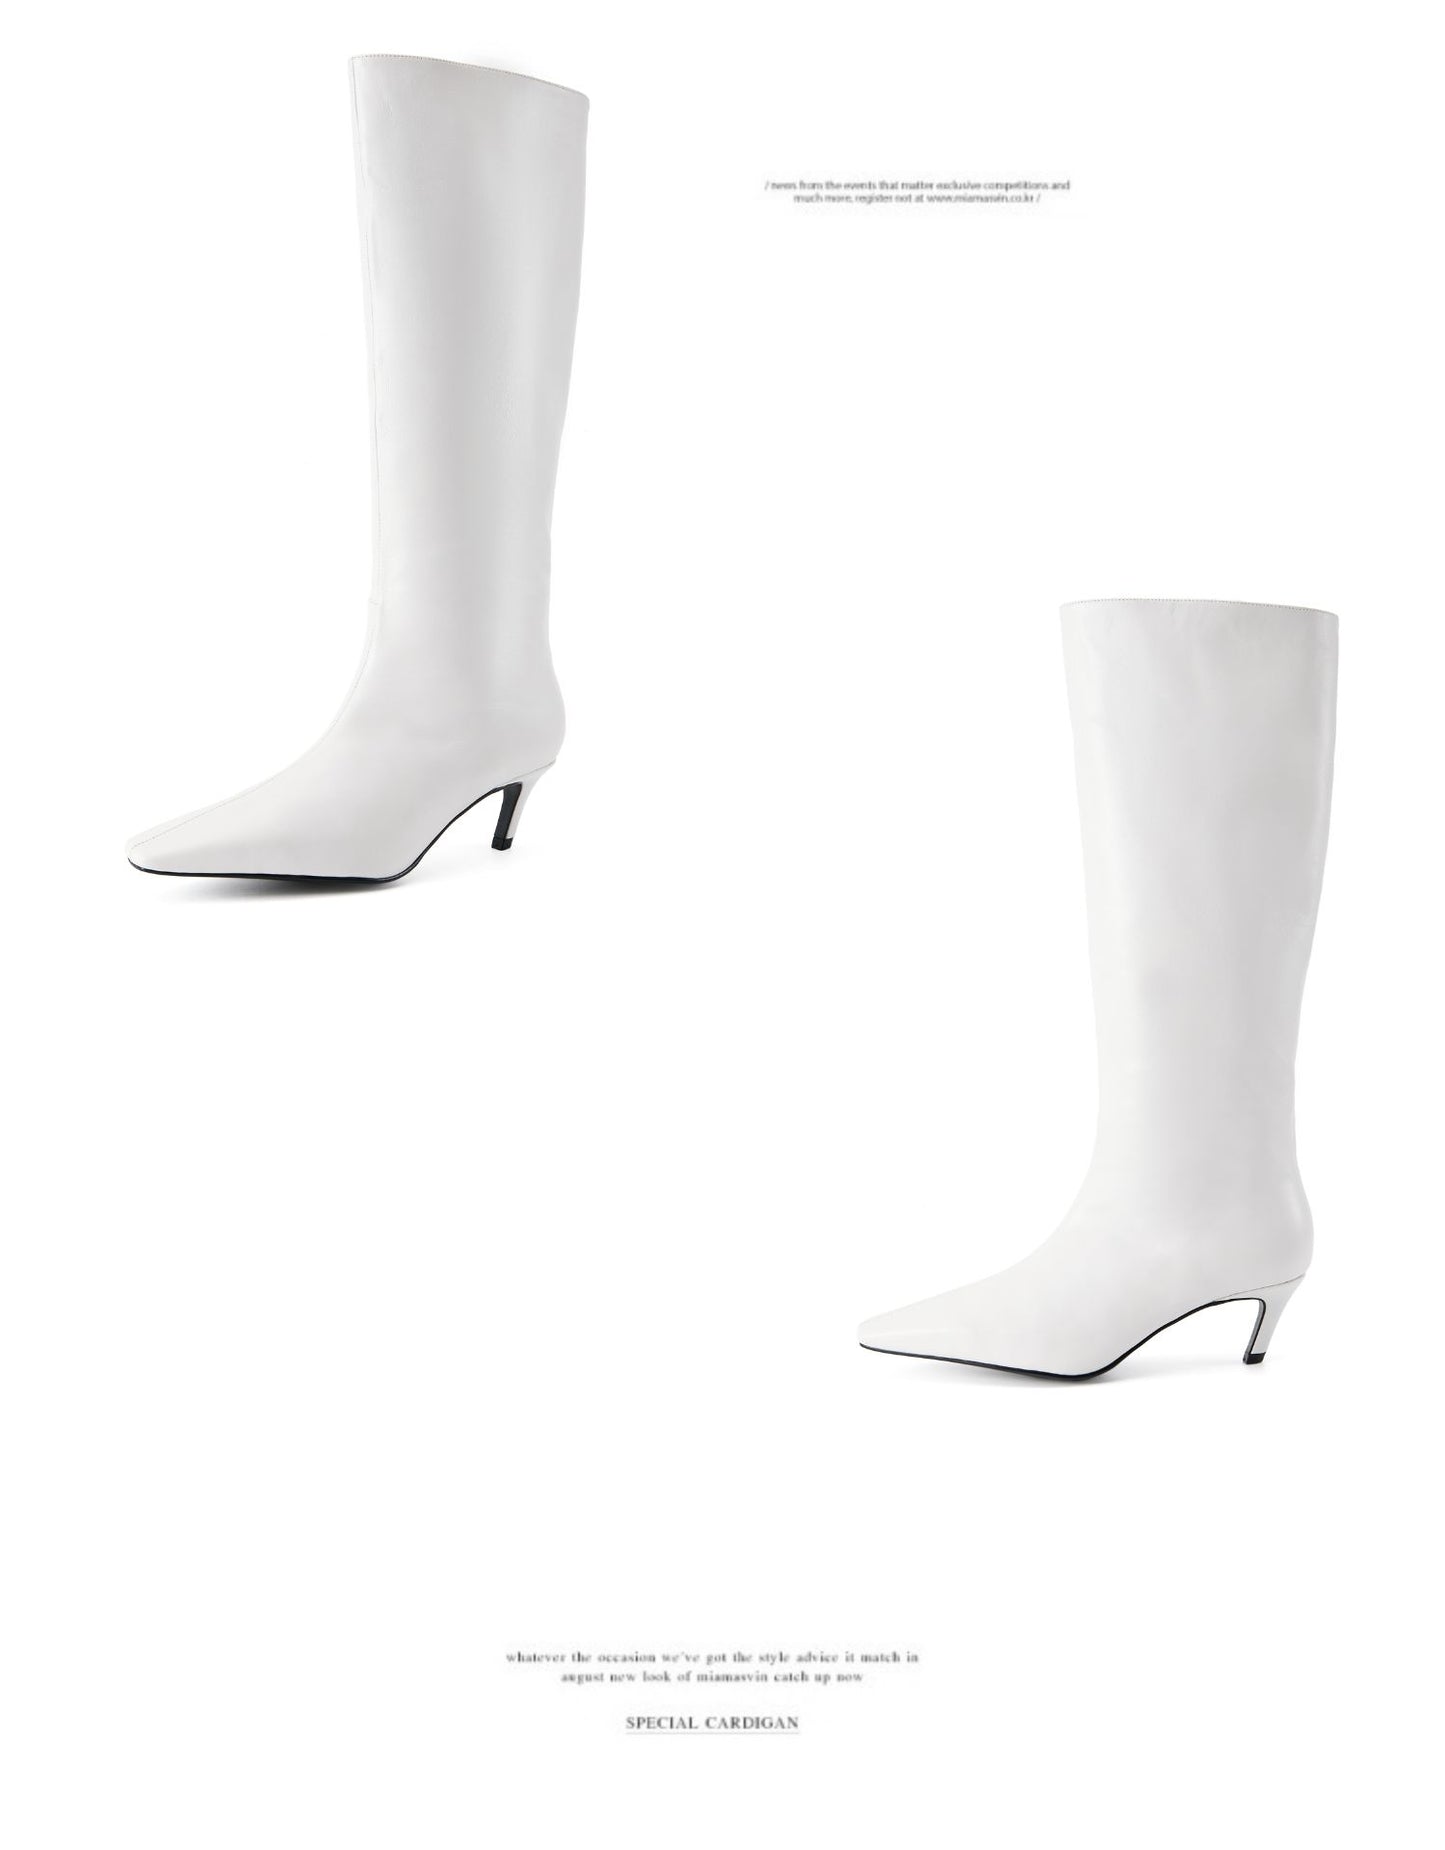 B-FEI original niche design minimalist style straight boots black and white leather personality slanted heel high boots- Melo